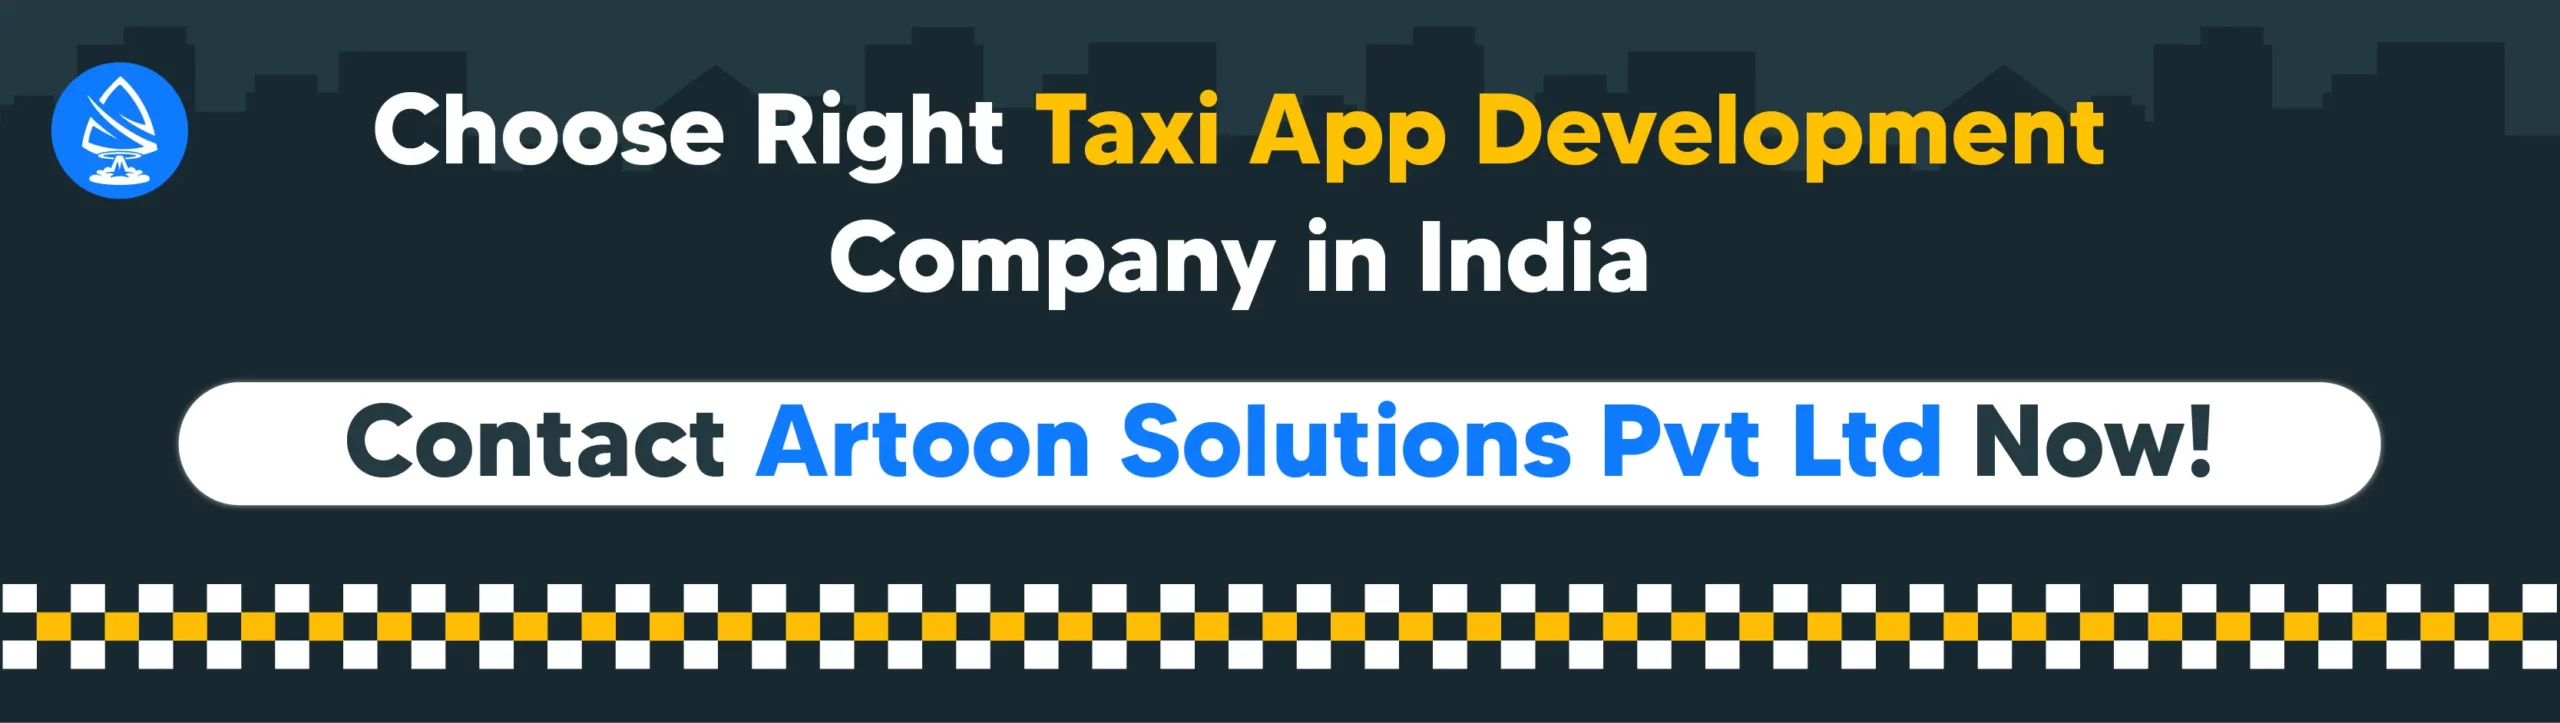 Choosing the Right Taxi App Development Company in India